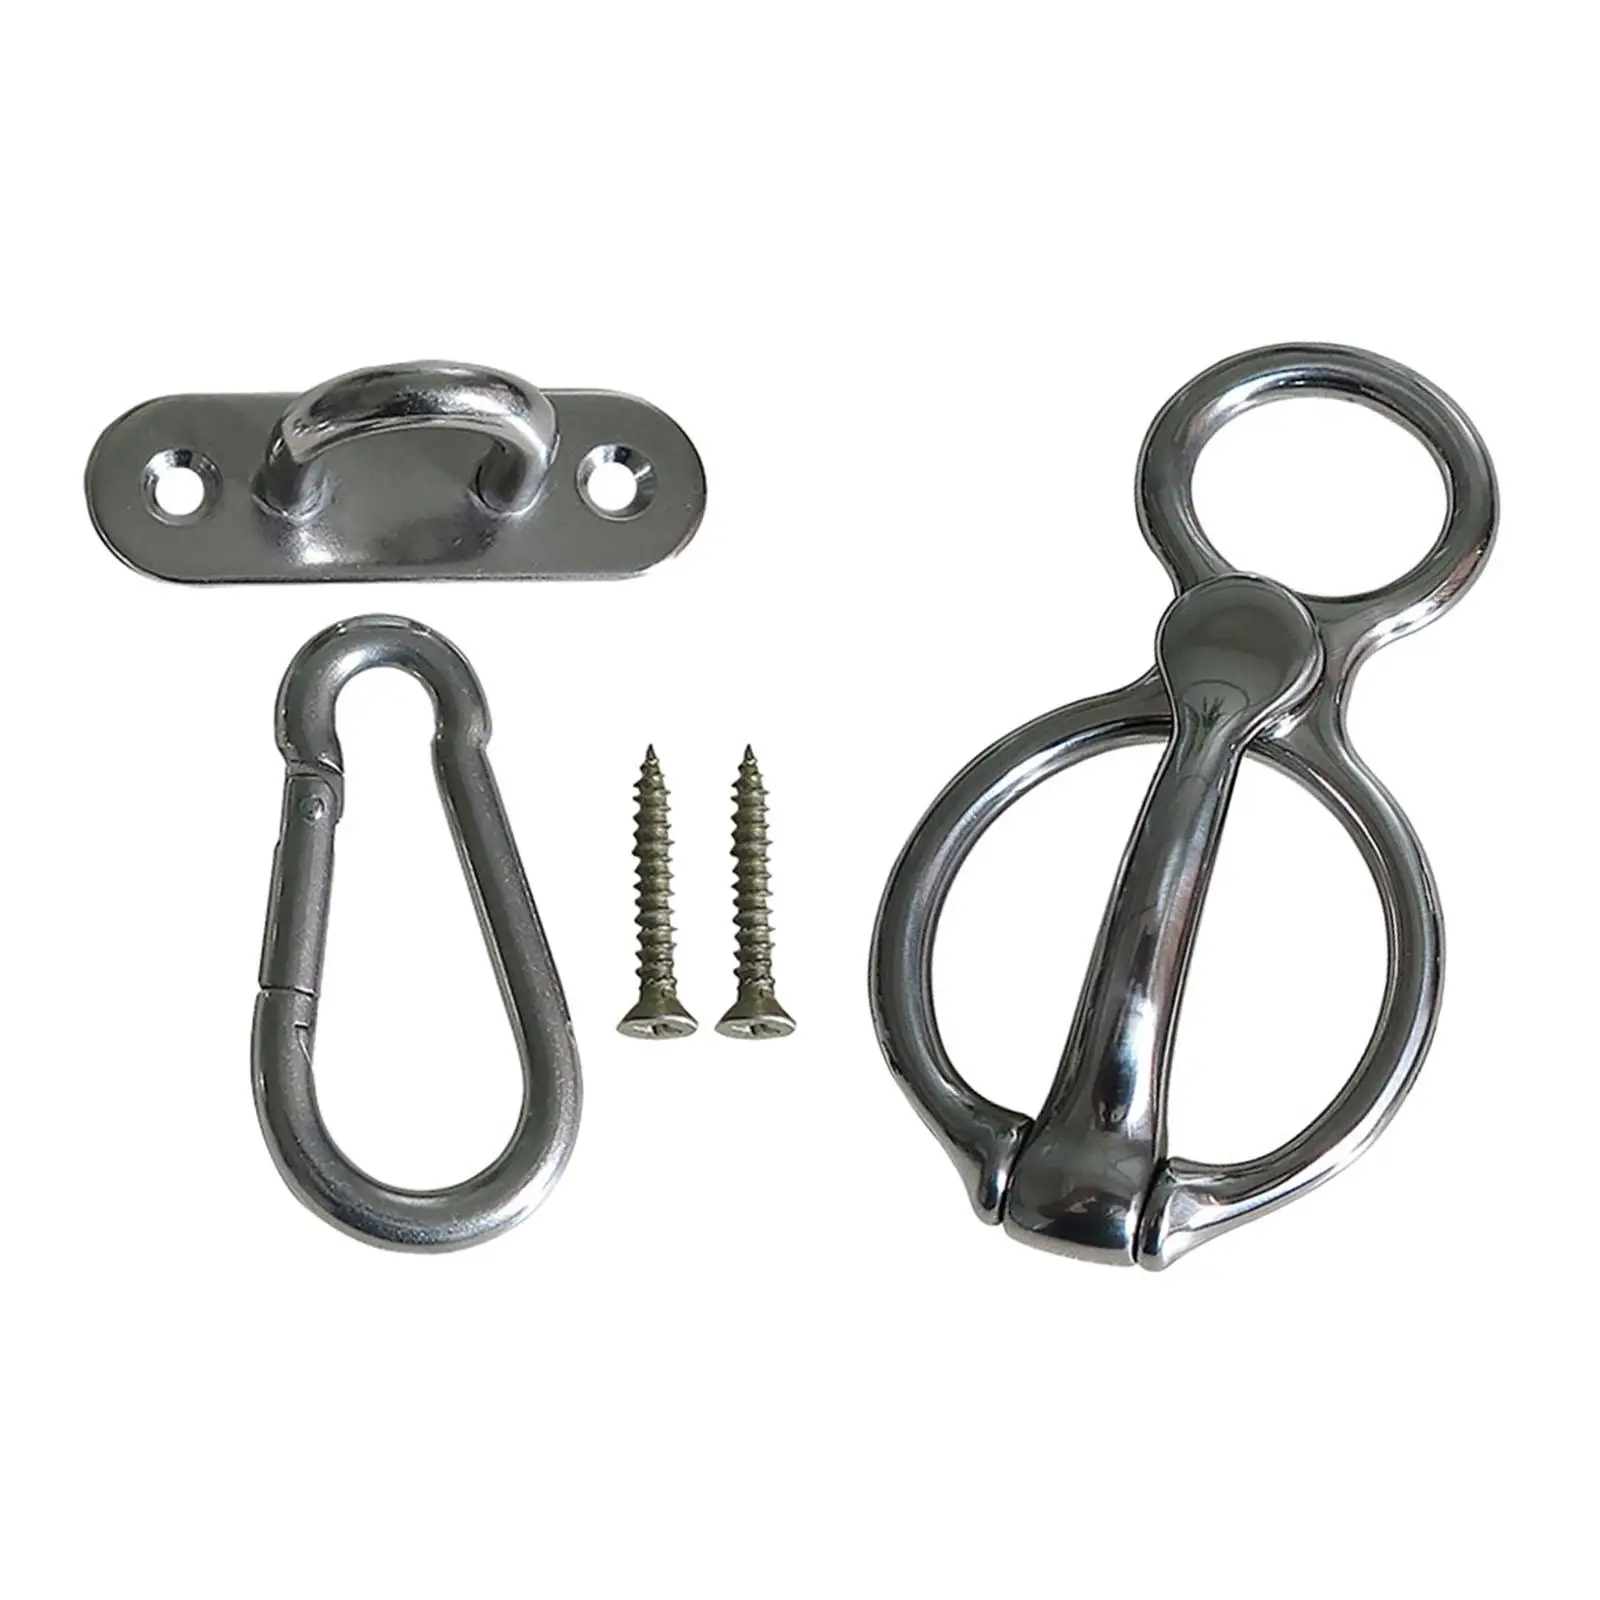 Horse Tie Ring Equestrian Stainless Steel Durable with Eye Bolt Hooks Training Equipment Stable Accessories Horse Tack Supplies